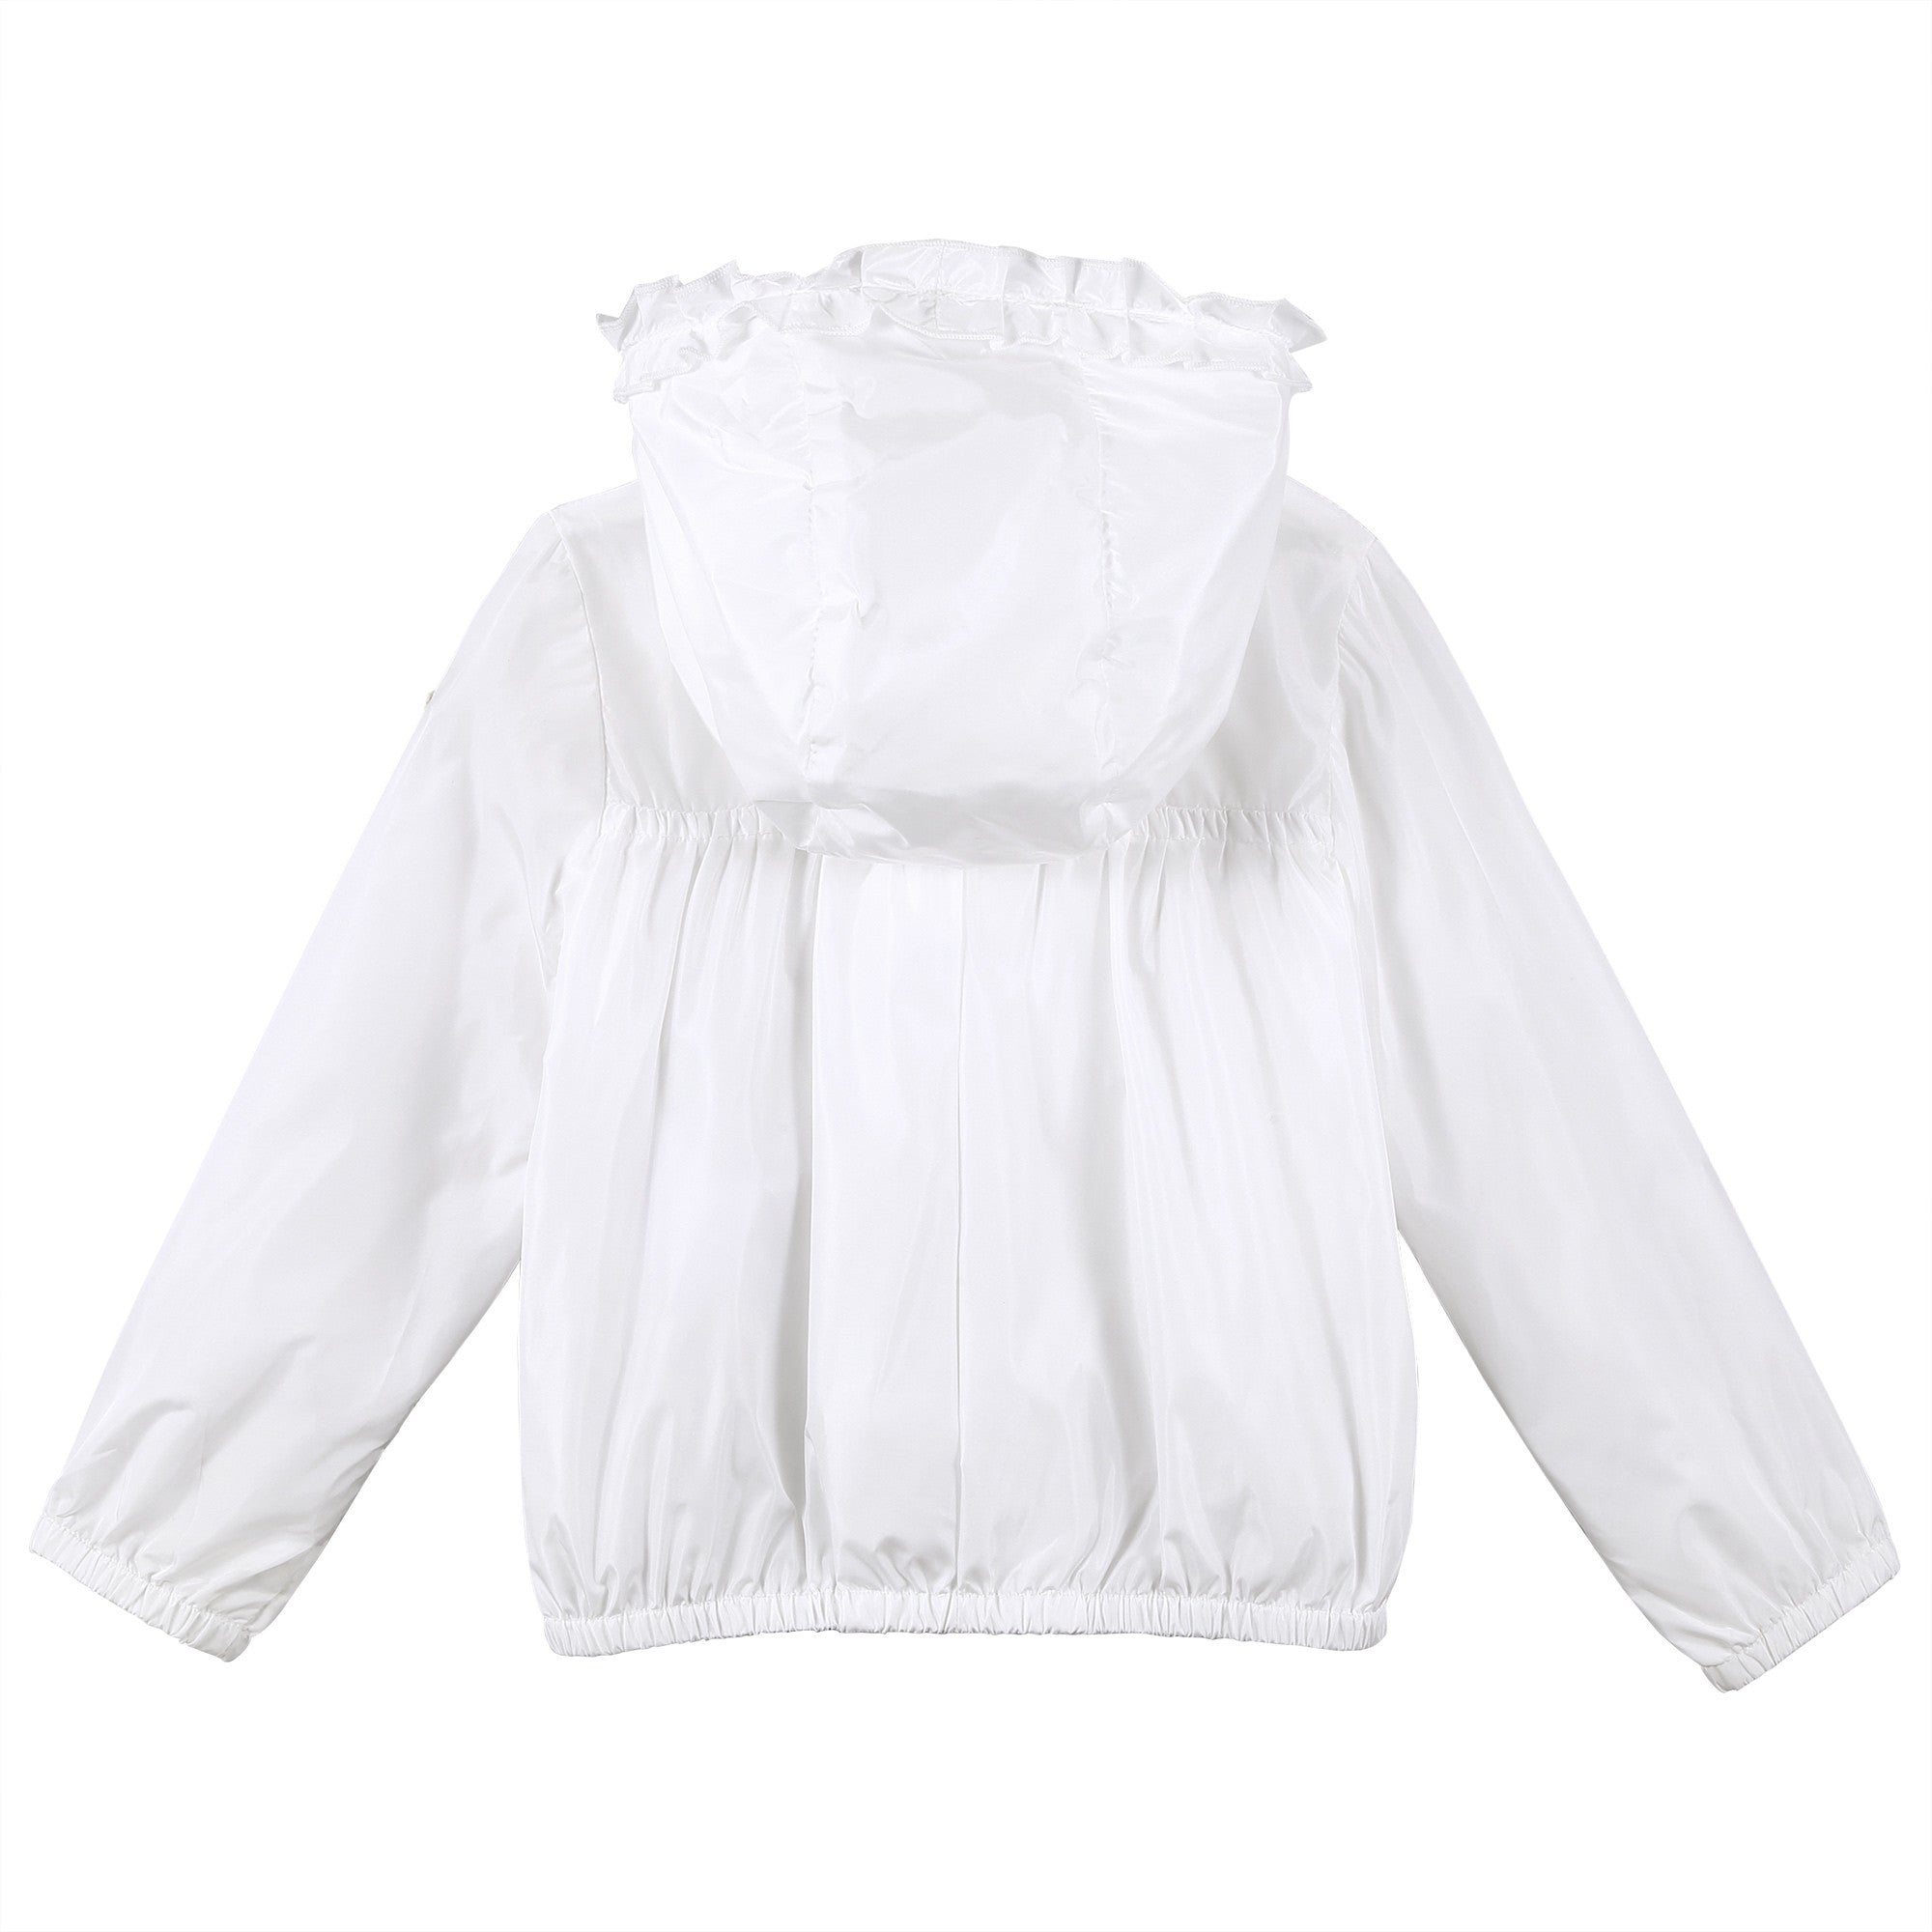 Baby Girls White Frilly Hooded 'Darma' Zip-Up Tops - CÉMAROSE | Children's Fashion Store - 2